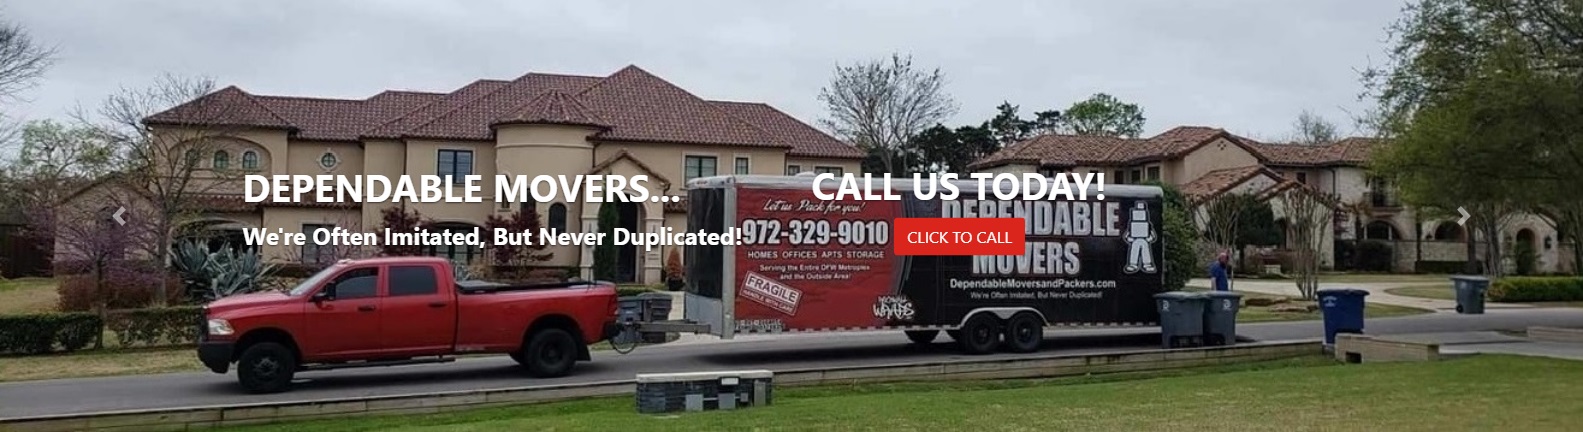 Dependable Movers Carrollton Mover Carrollton Moving Company - Home Office Apartment Movers Residential Commercial Movers in Carrollton Texas